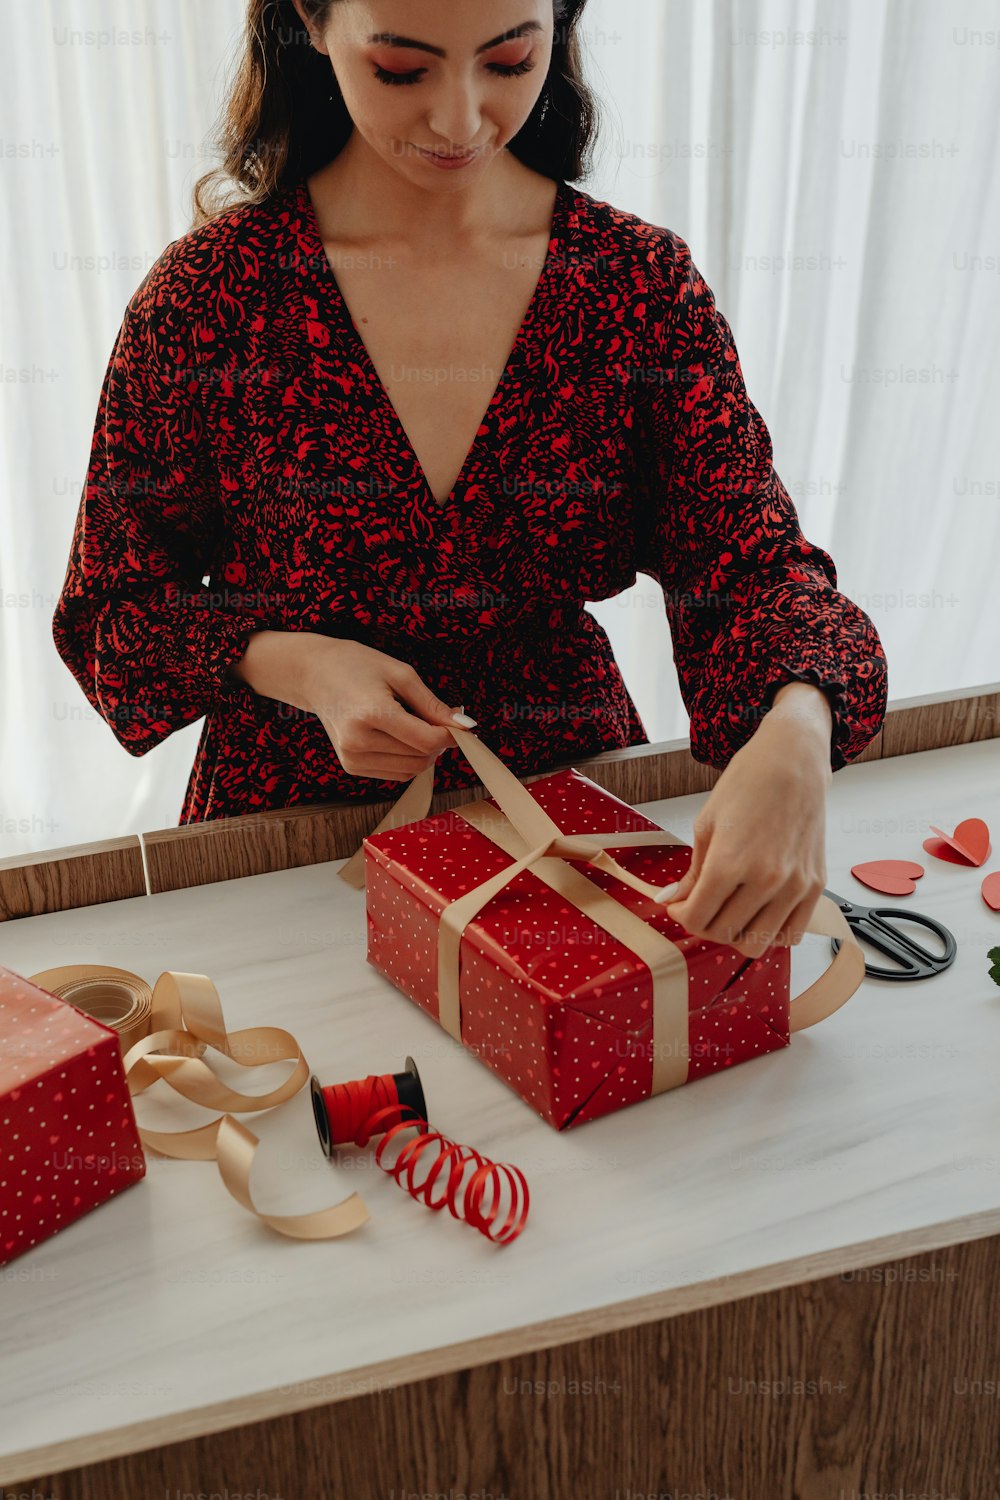 a woman in a red dress opening a gift box